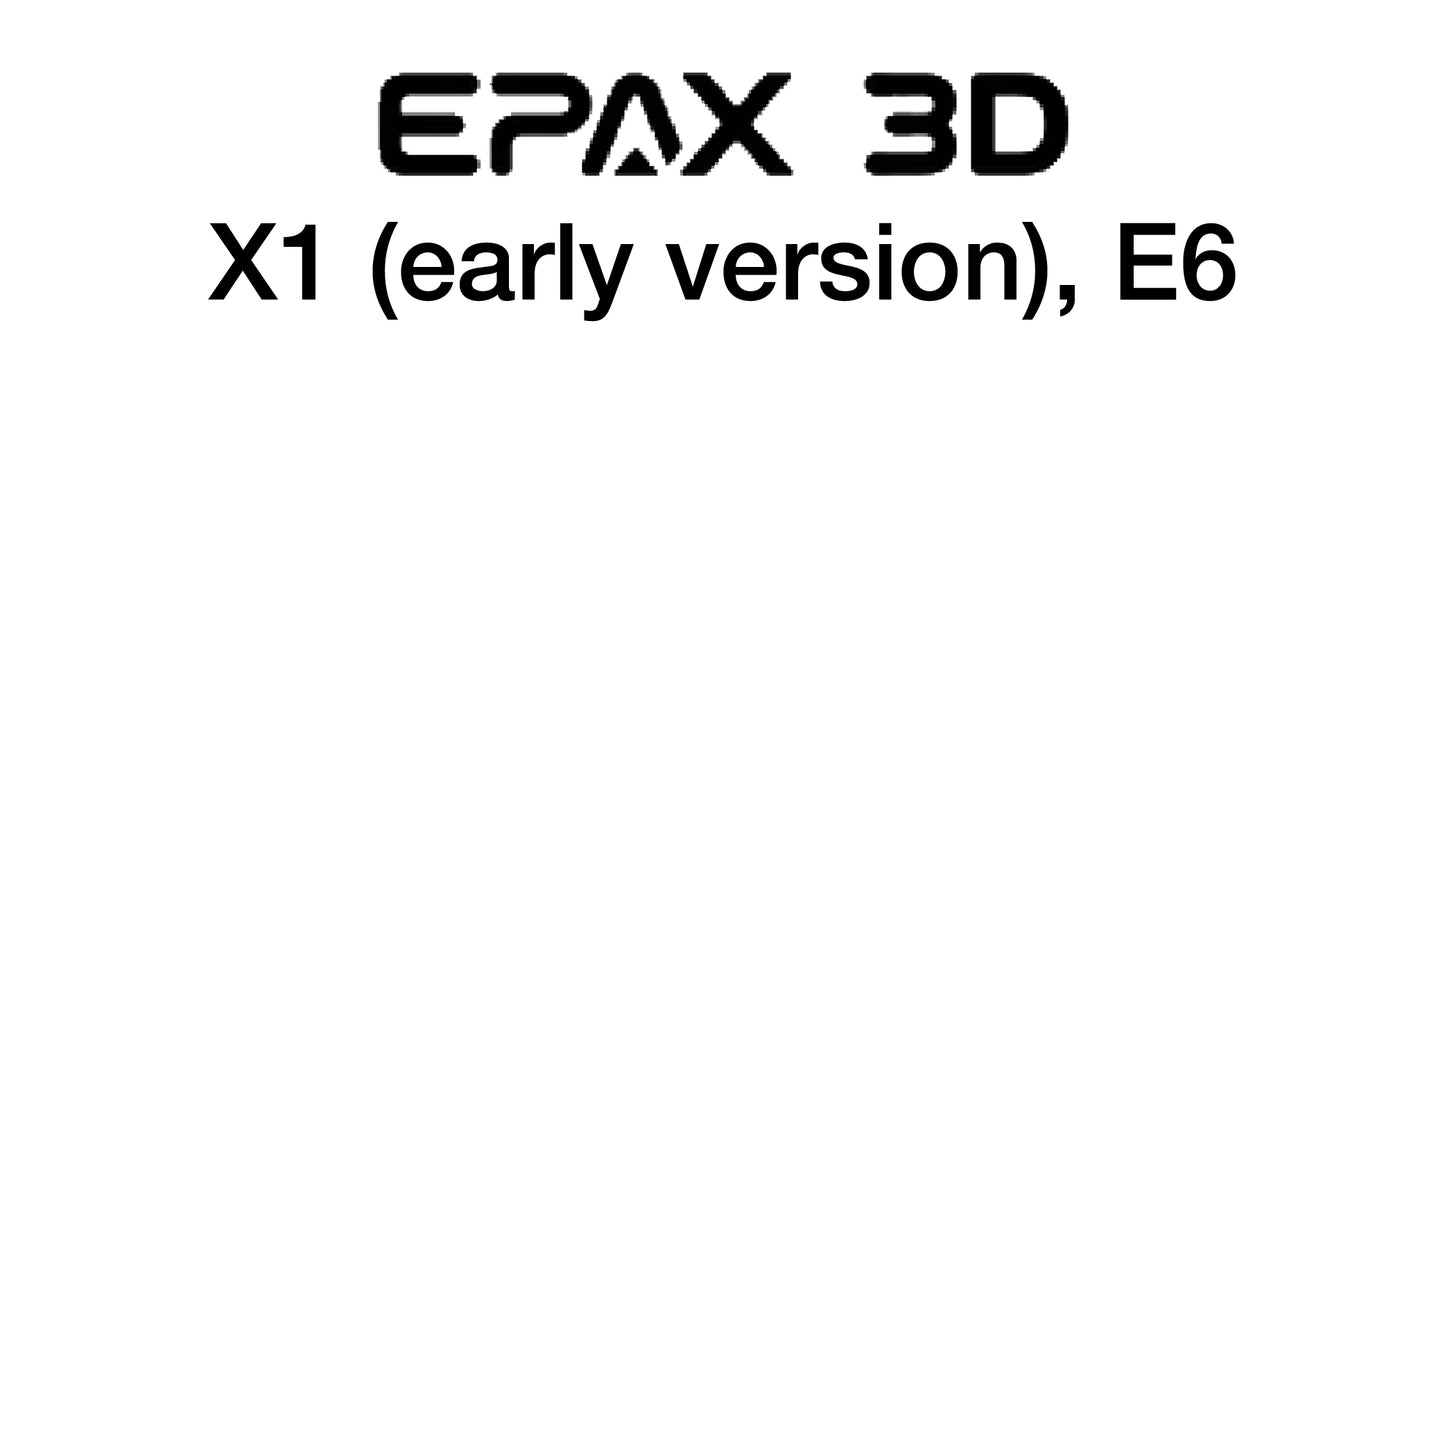 Kit - EPAX 3D E6 and X1 Early Version - 130 x 80